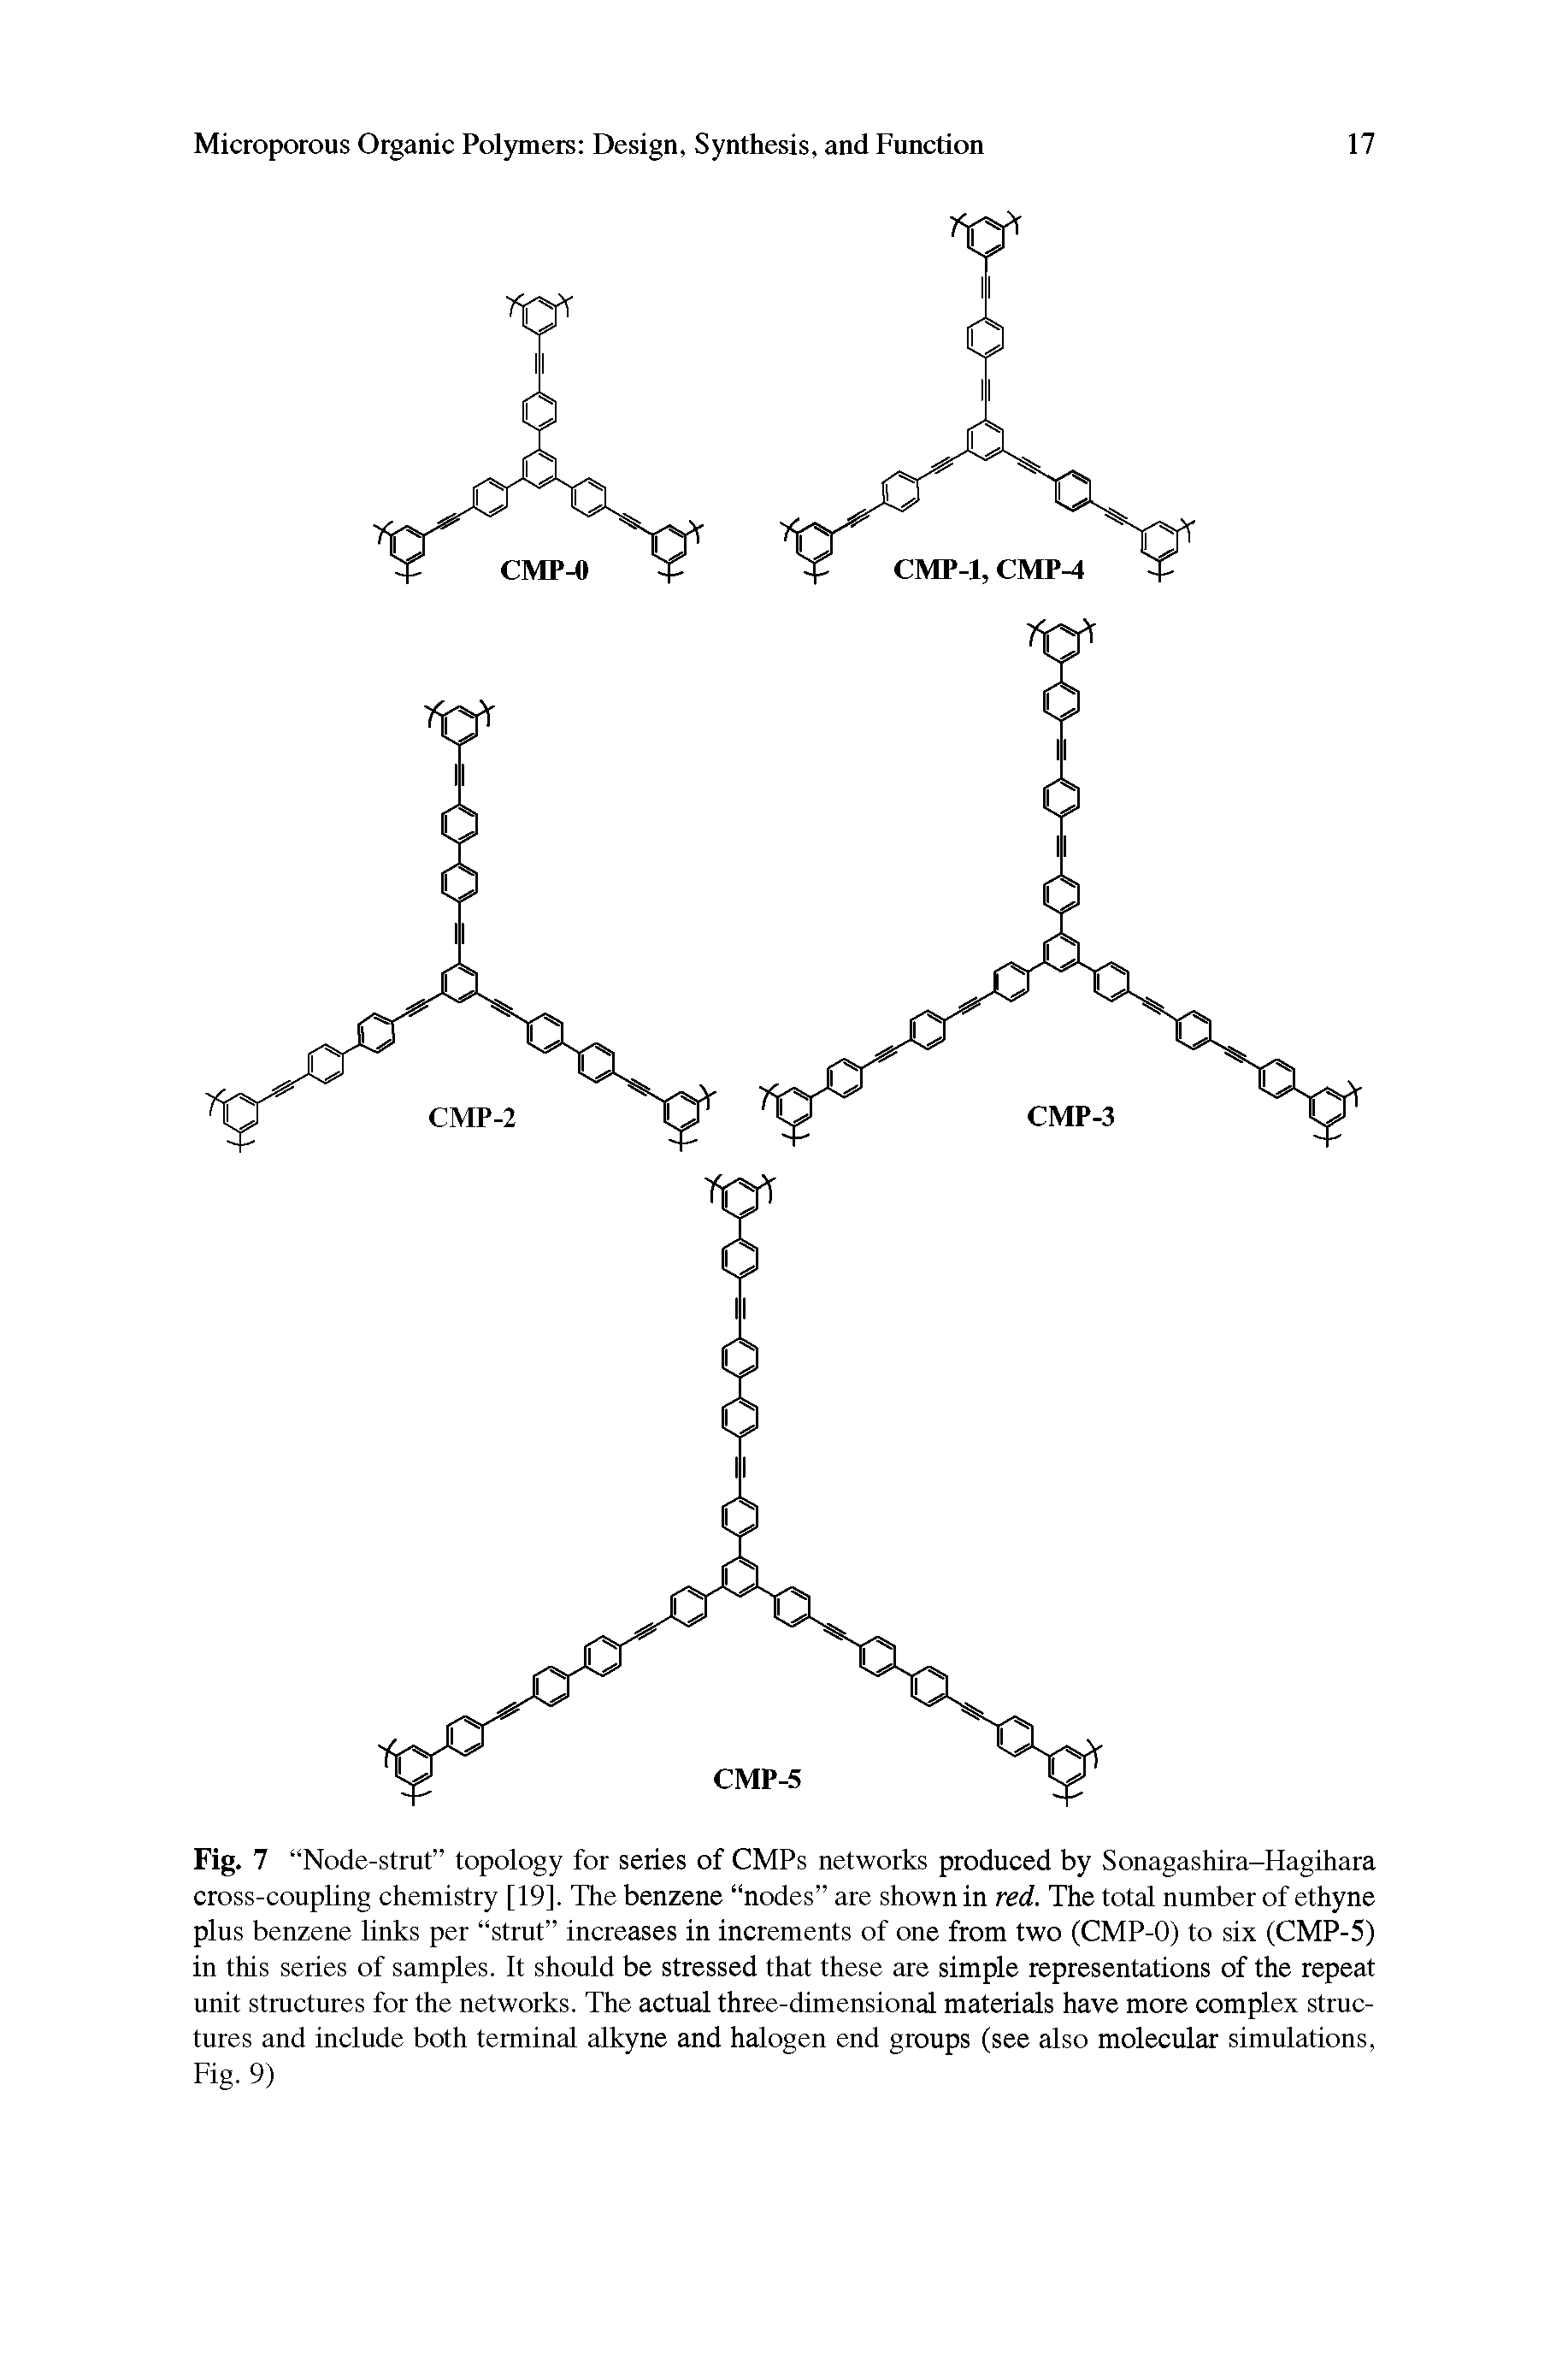 Fig. 7 Node-strut topology for series of CMPs networks produced by Sonagashira-Hagihara cross-coupling chemistry [19]. The benzene nodes are shown in red. The total number of ethyne plus benzene links per strut increases in increments of one from two (CMP-0) to six (CMP-5) in this series of samples. It should be stressed that these are simple representations of the repeat unit structures for the networks. The actual three-dimensional materials have more complex structures and include both terminal alkyne and halogen end groups (see also molecular simulations, Fig. 9)...